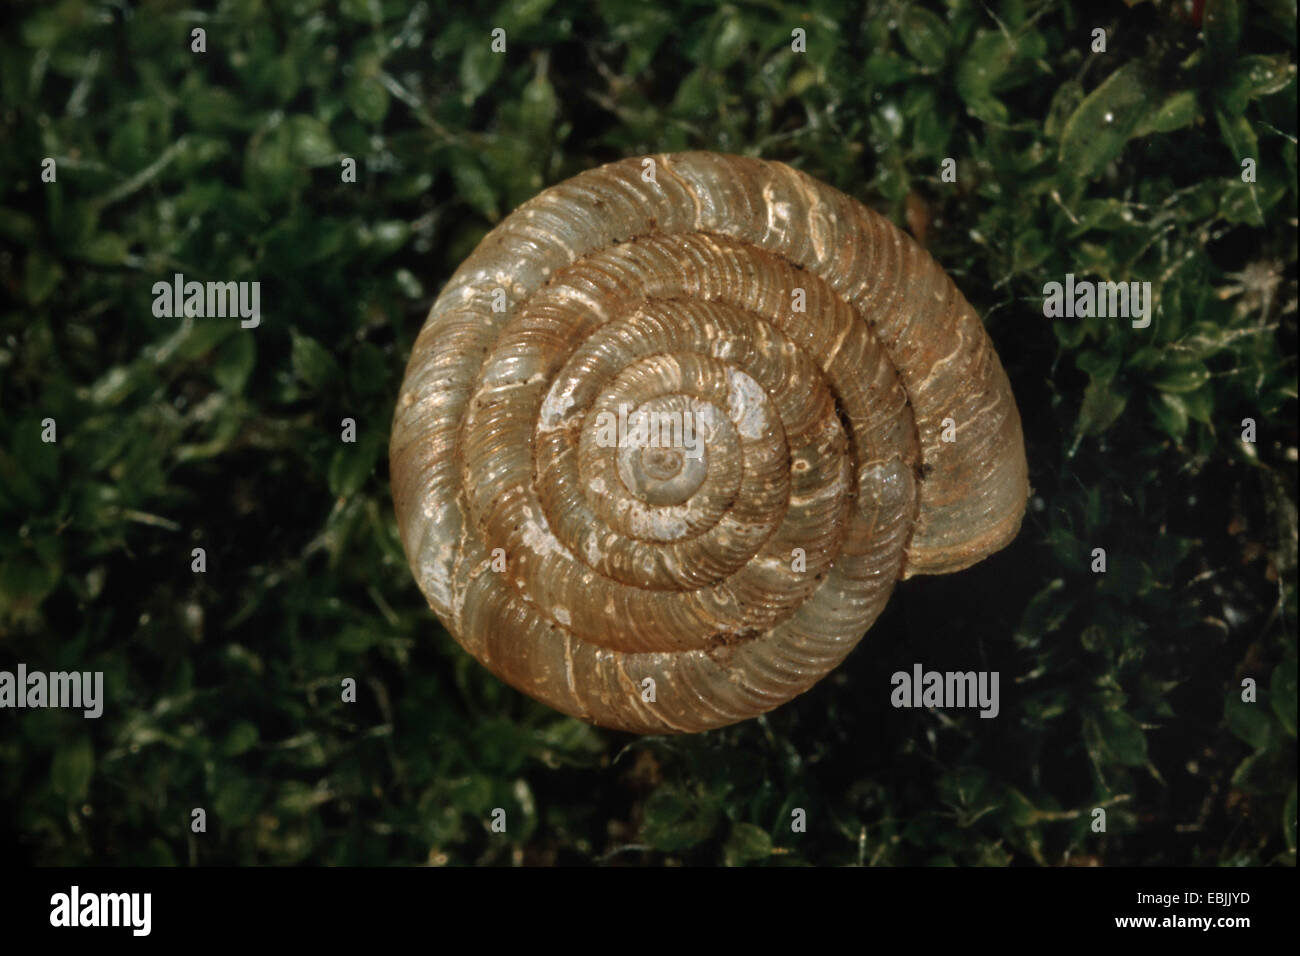 rounded snail, rotund disc snail, radiated snail (Discus rotundatus, Goniodiscus rotundatus), upper view of the shell Stock Photo